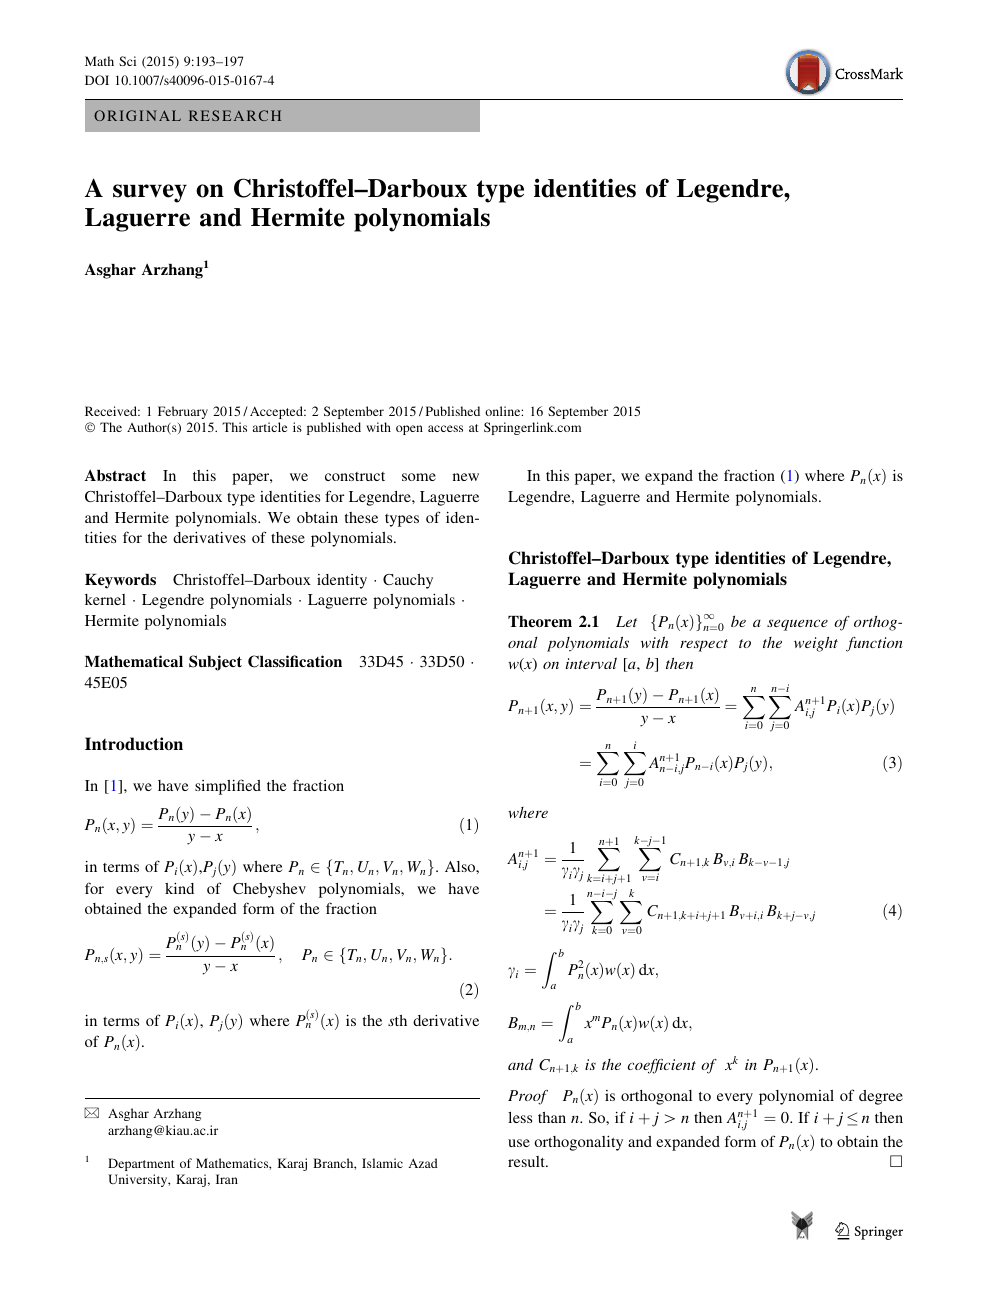 A Survey On Christoffel Darboux Type Identities Of Legendre Laguerre And Hermite Polynomials Topic Of Research Paper In Mathematics Download Scholarly Article Pdf And Read For Free On Cyberleninka Open Science Hub